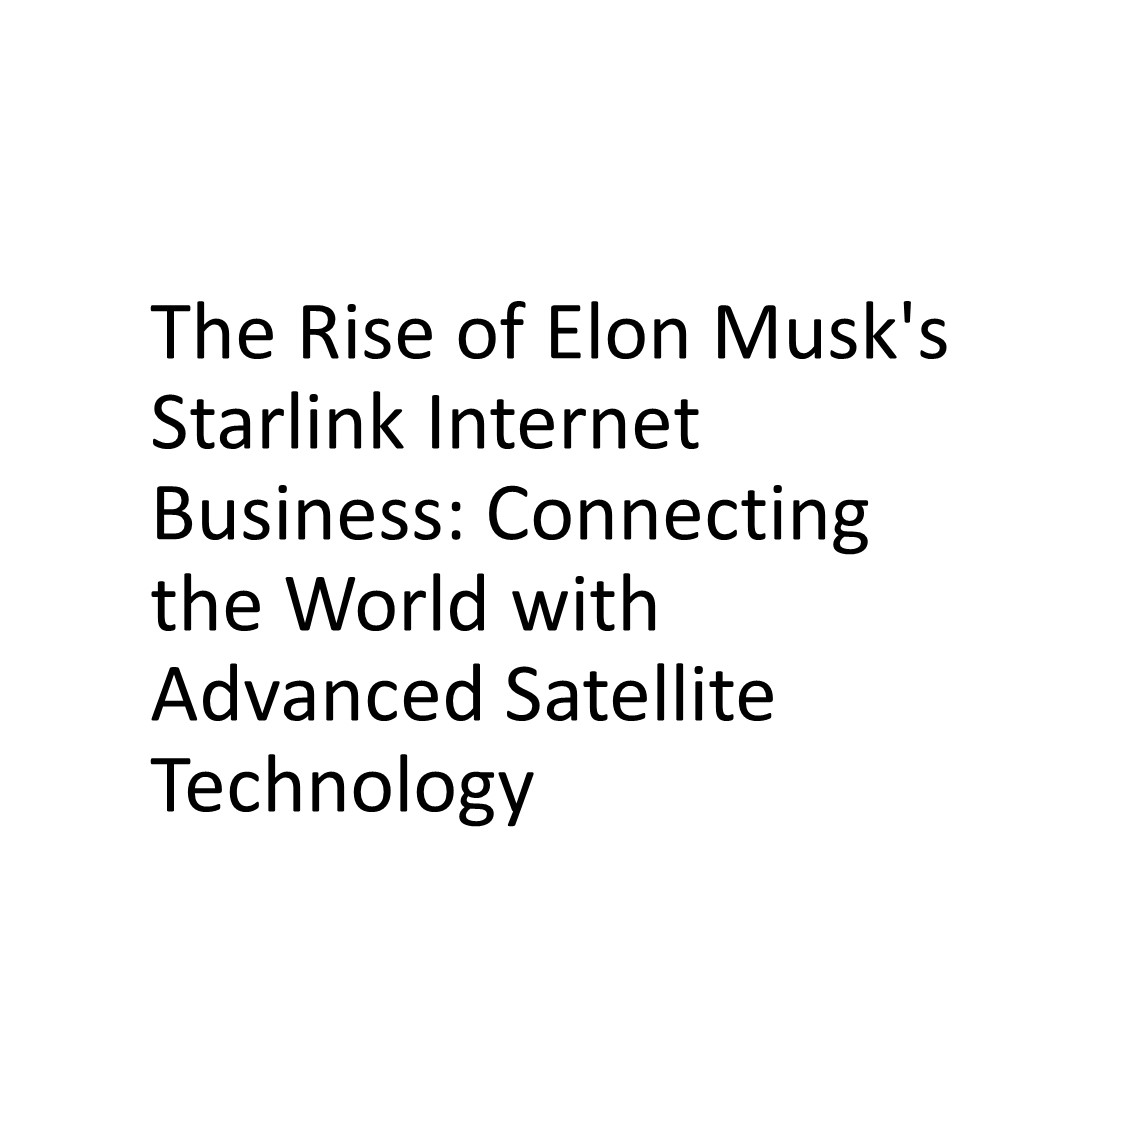 The Rise of Elon Musk&#39;s Starlink Internet Business: Connecting the World with Advanced Satellite Technology